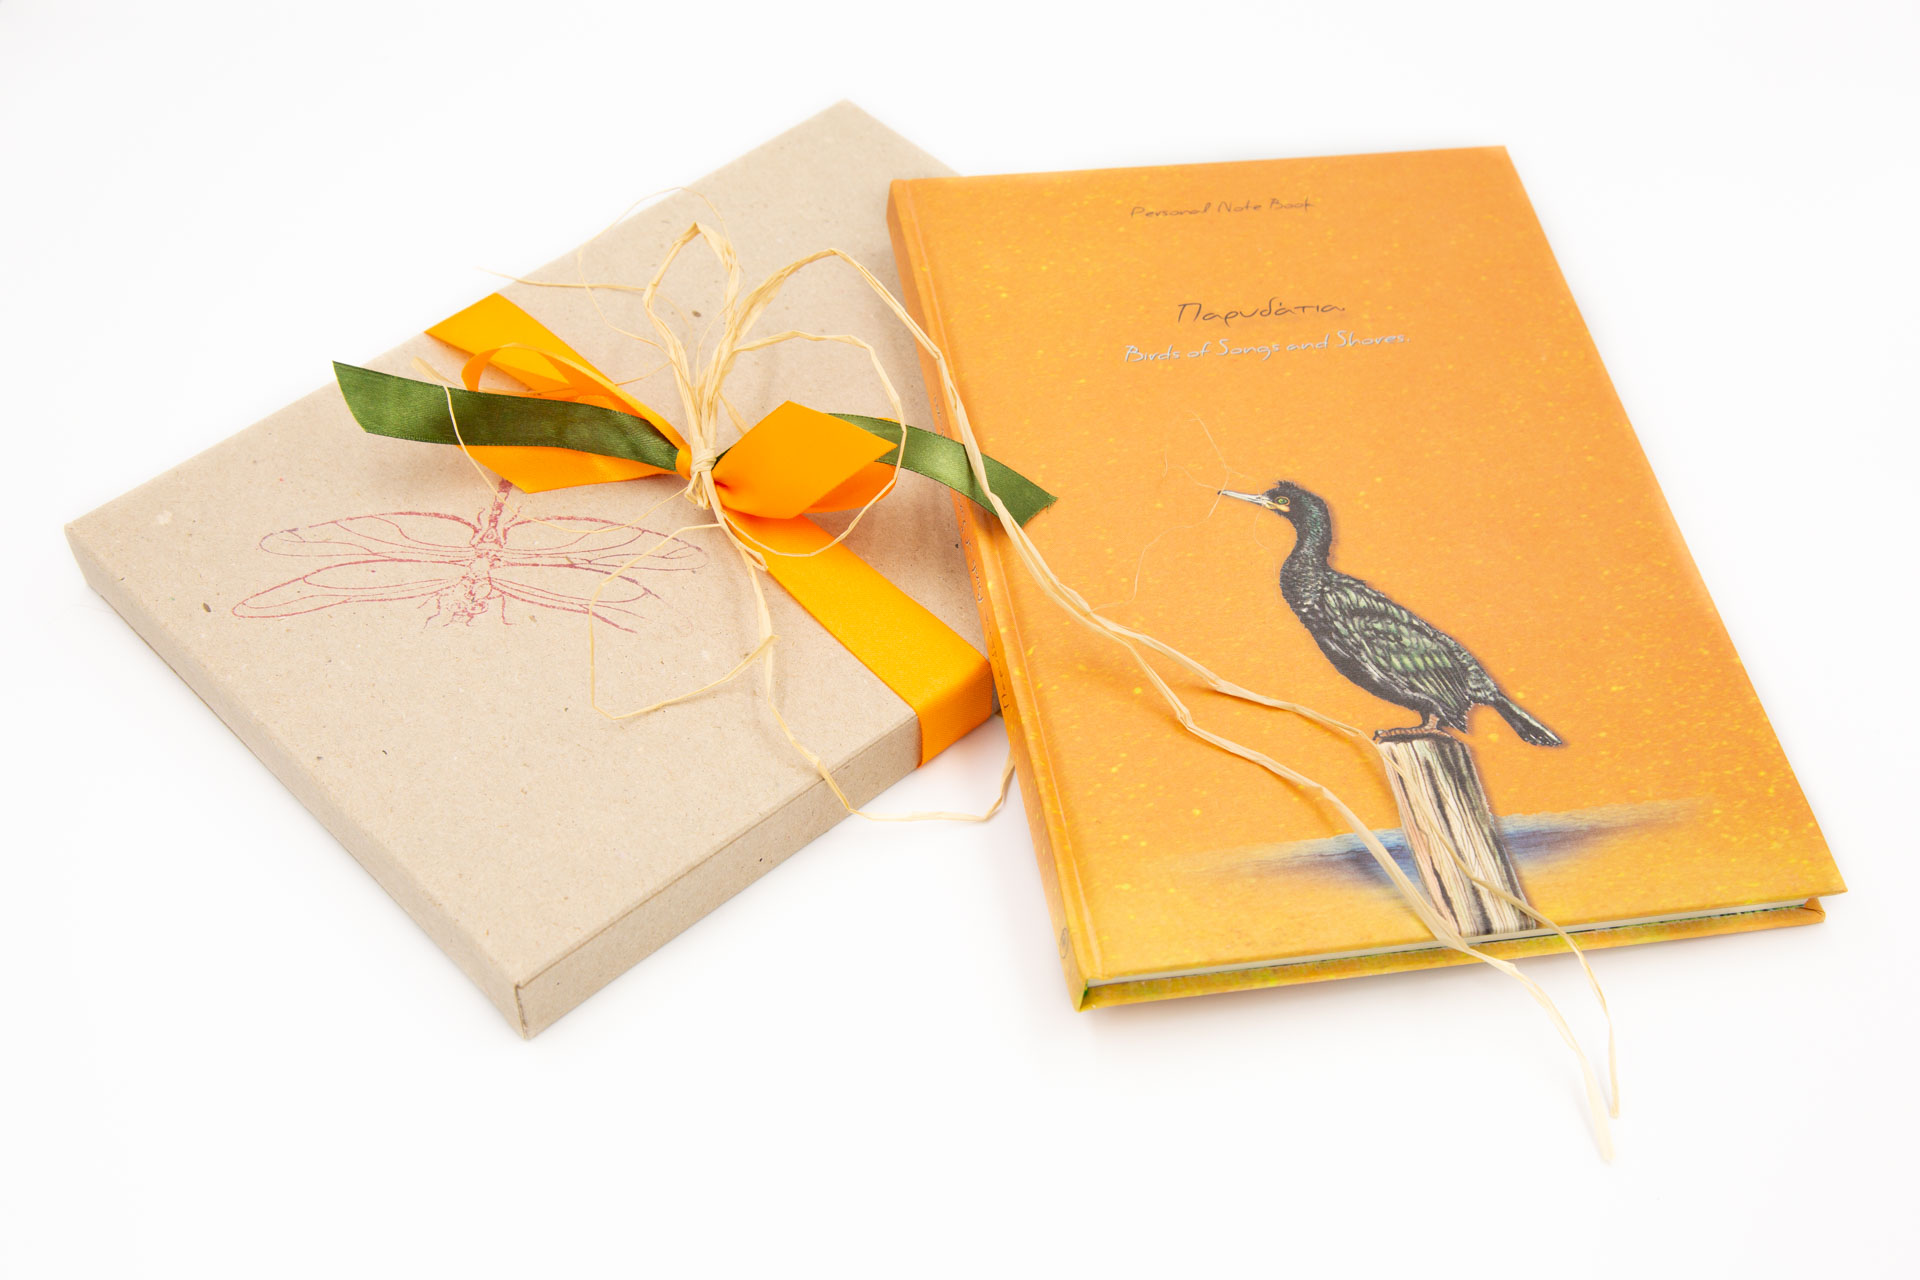 Personal notebook "Birds of Songs and Shores" - Front and Package